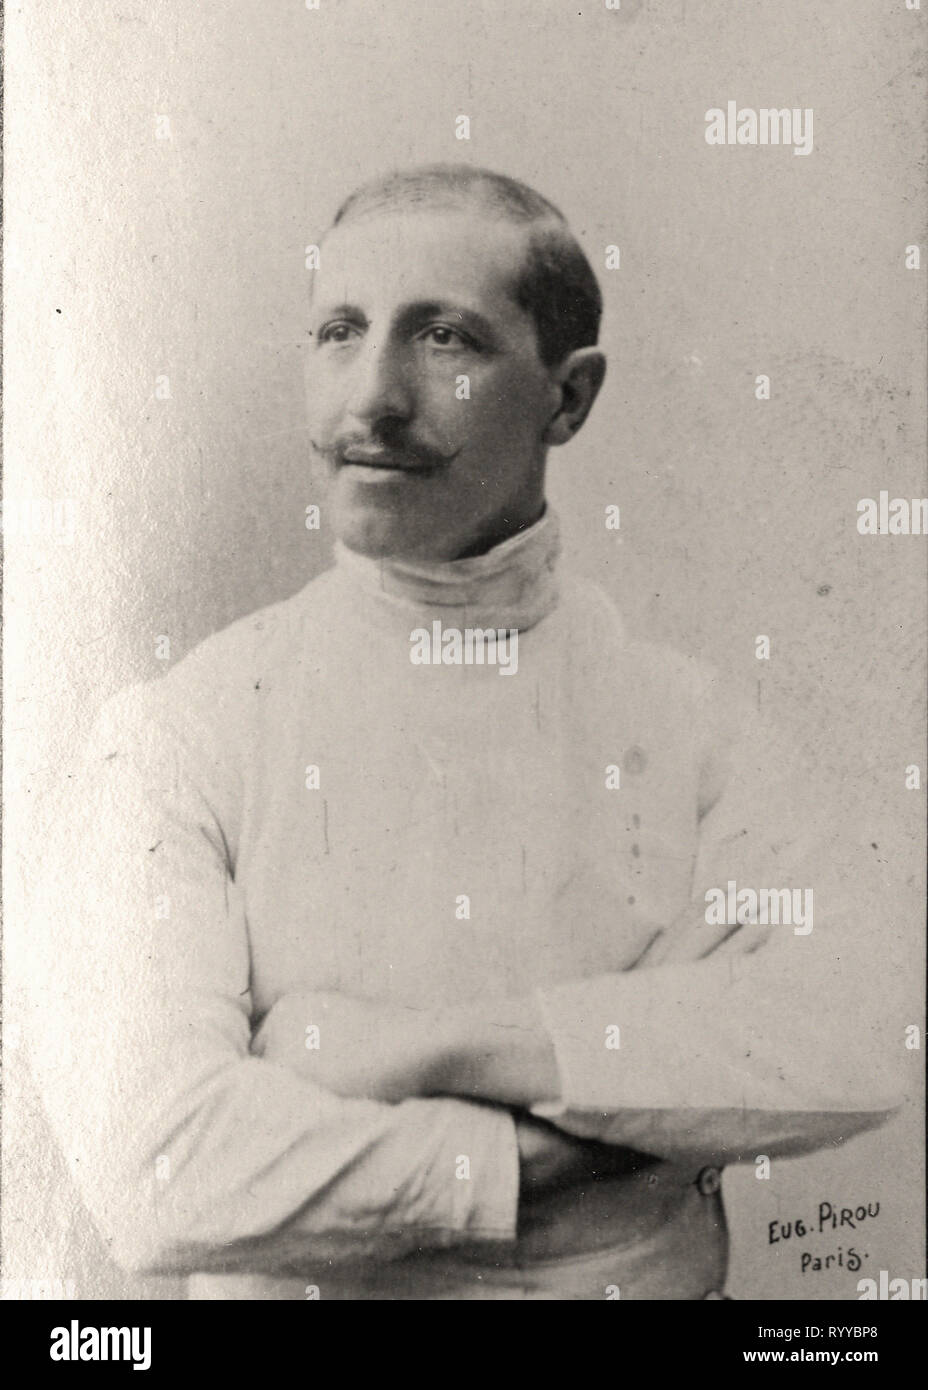 Photographic Portrait Of Pini   From Collection Félix Potin, Early 20th Century Stock Photo